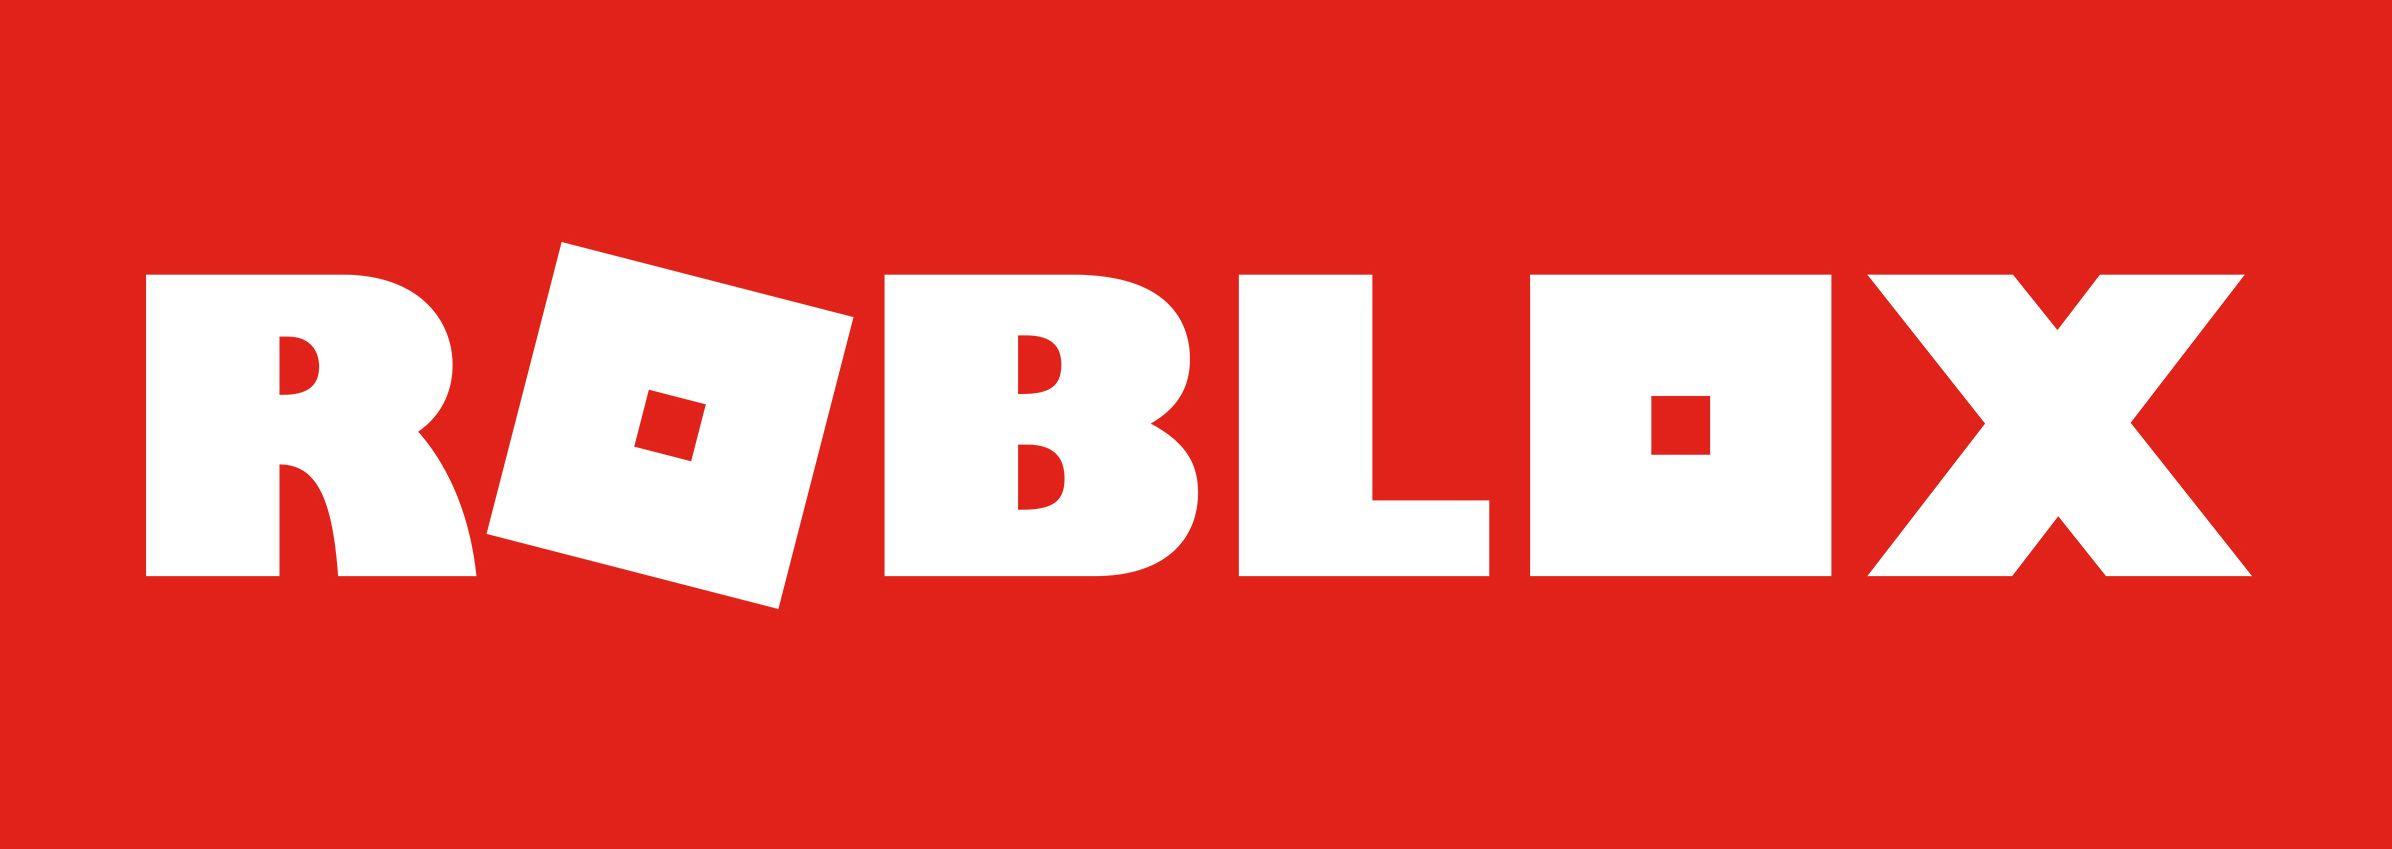 Roblox Logo - Roblox Logo, Roblox Symbol, Meaning, History and Evolution